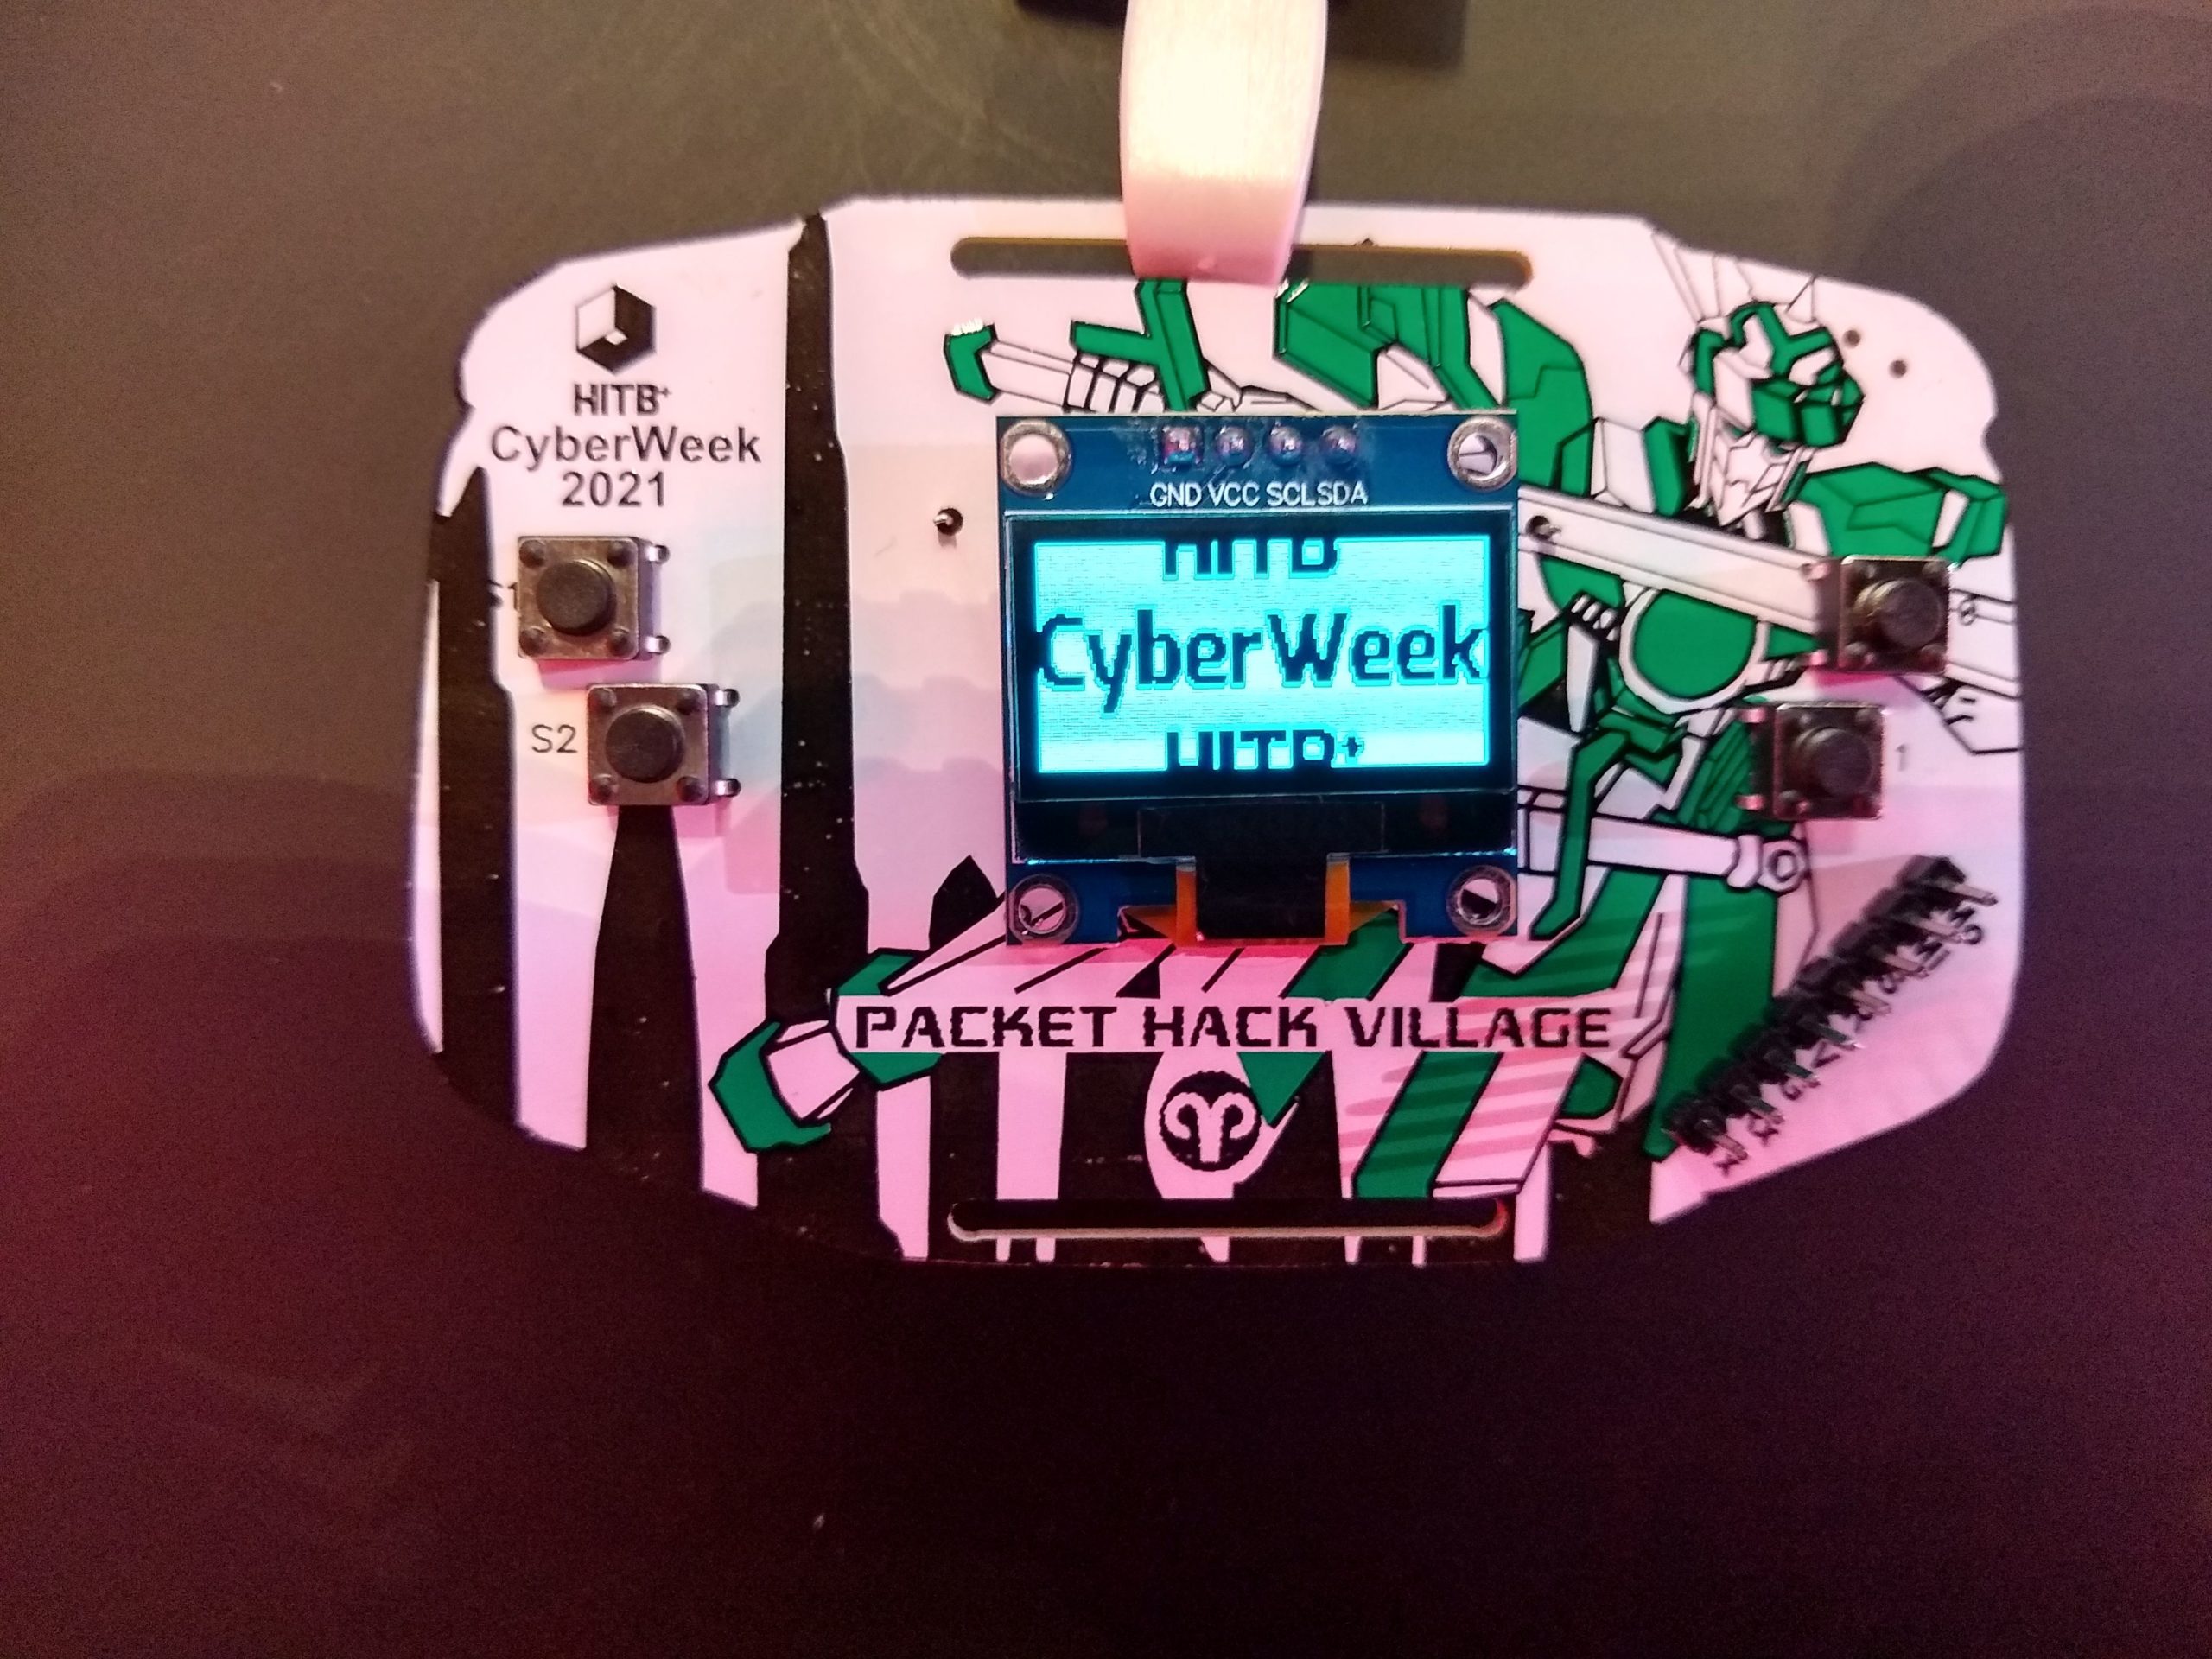 A custom electronic badge developed for the Packet Hack Village